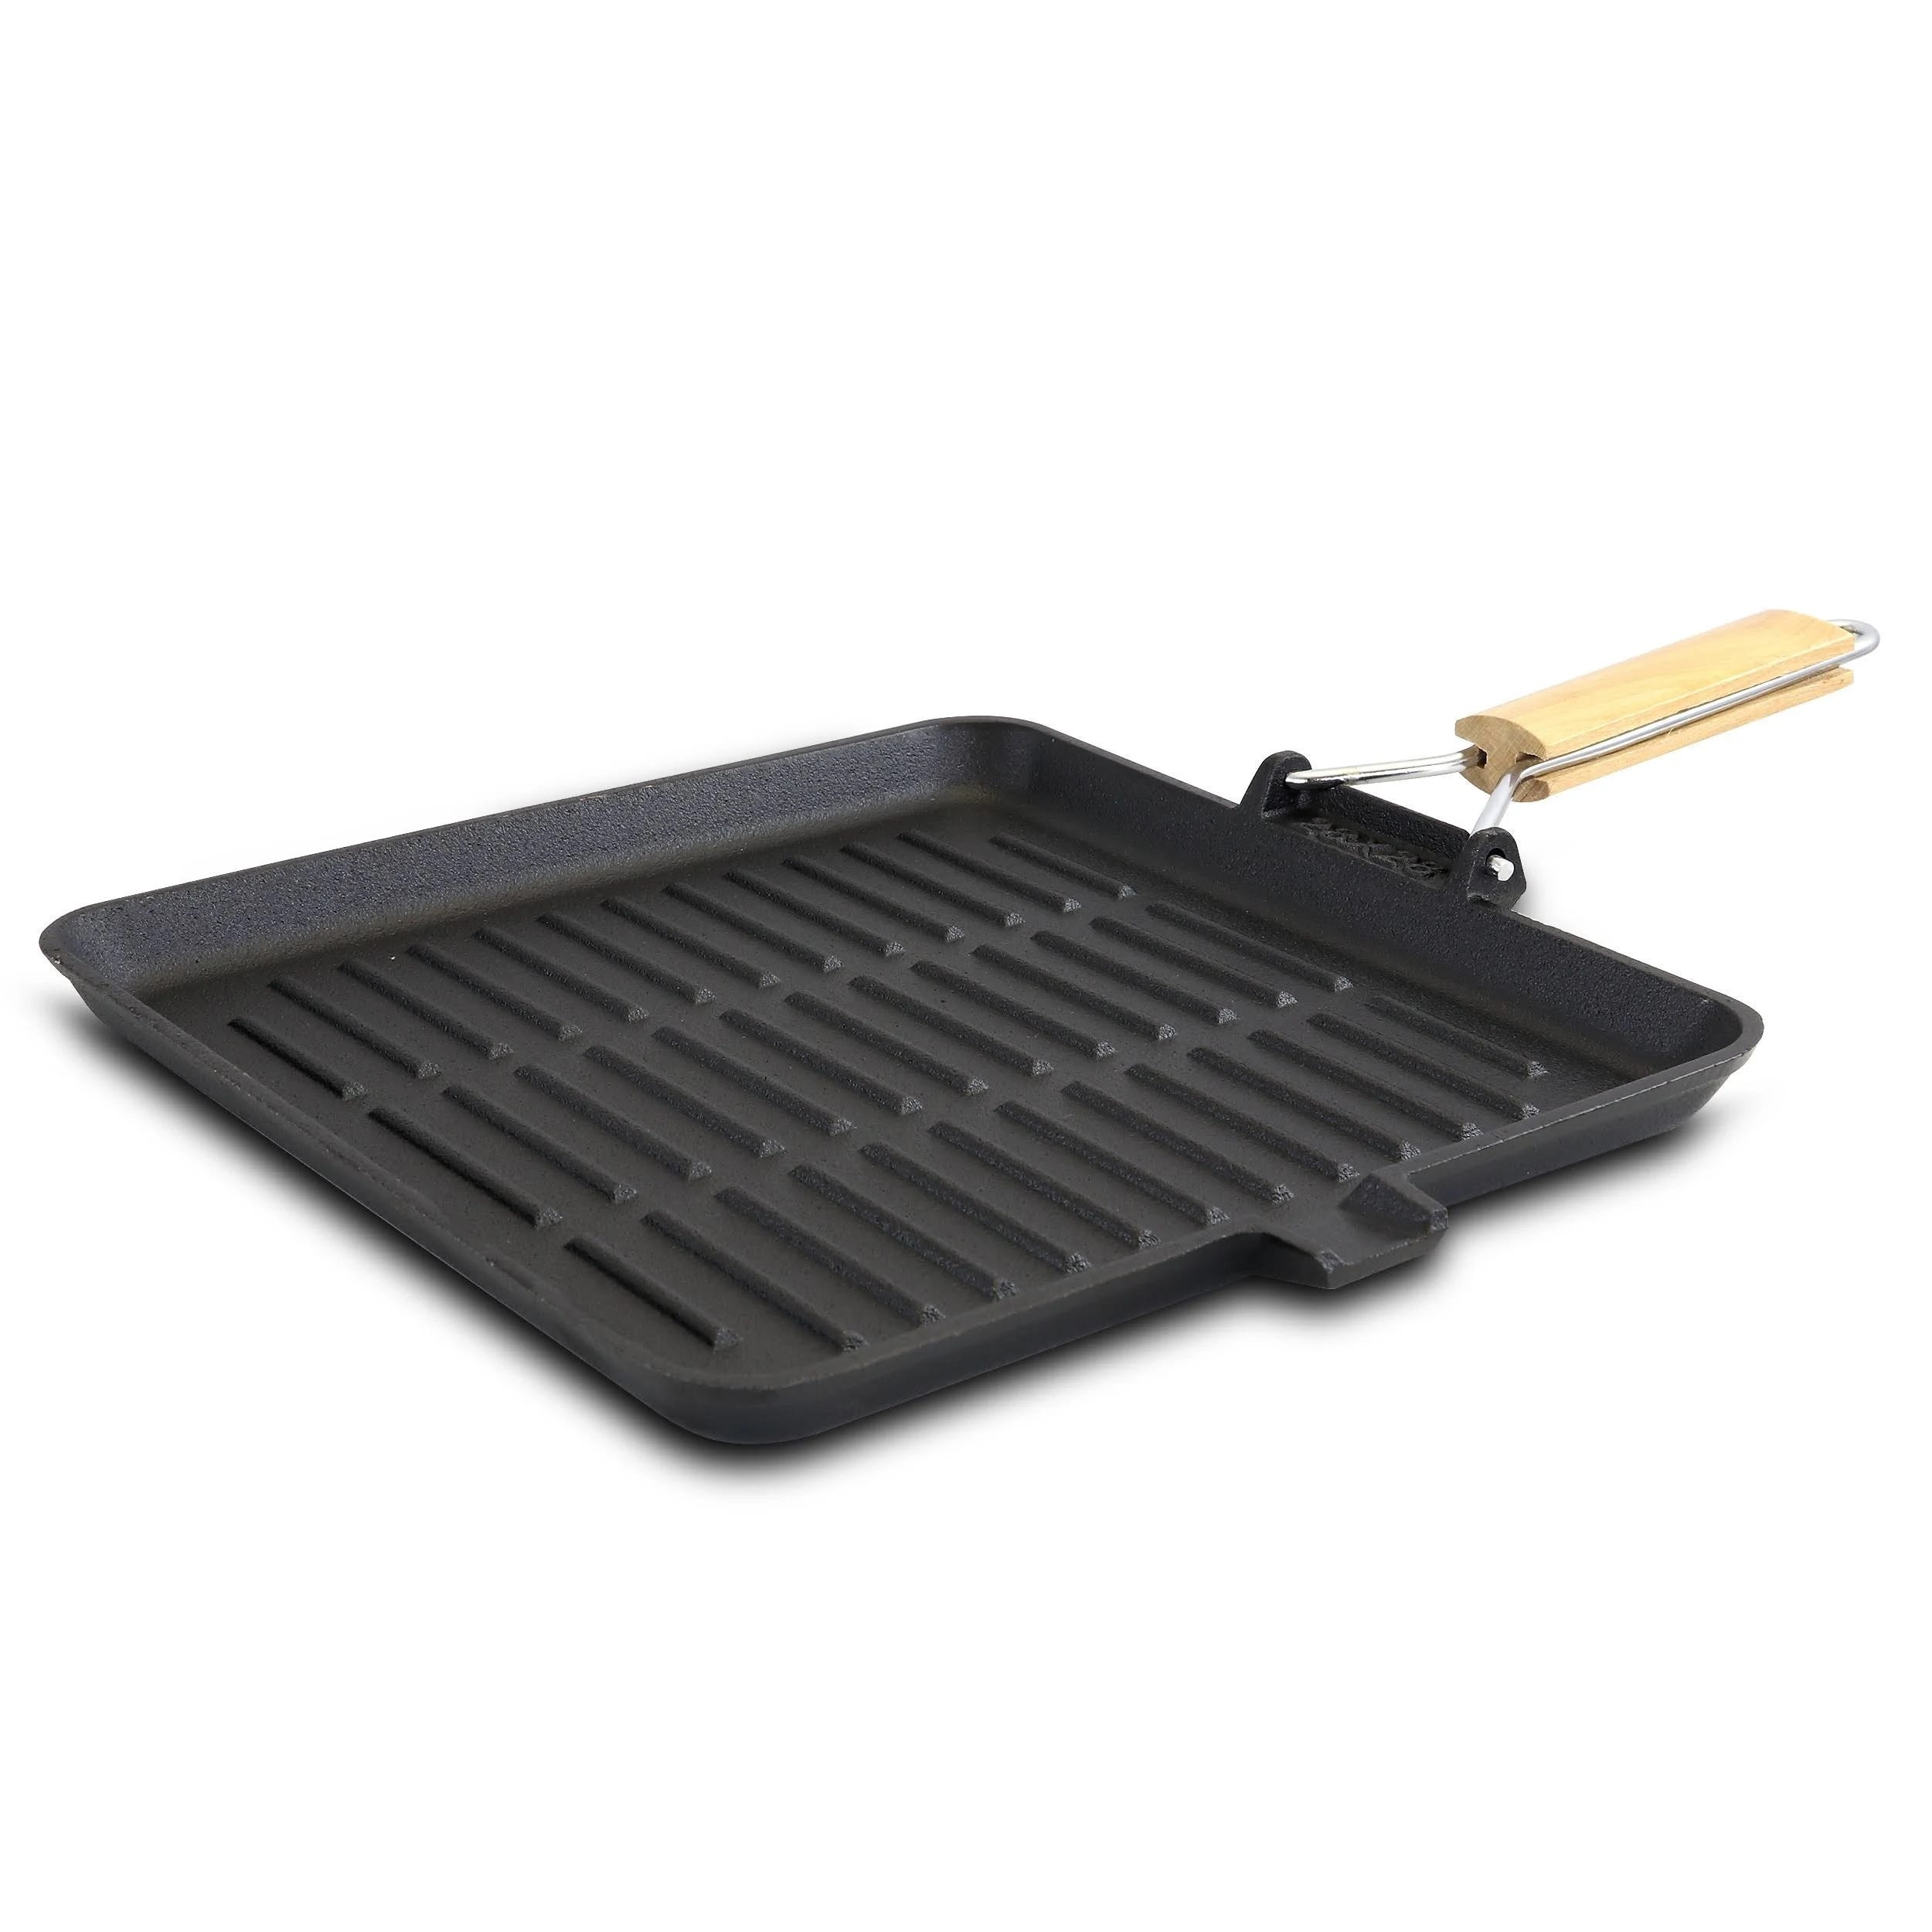 Premium Cast Iron Grill Pan with Foldable Wood Handle | Image